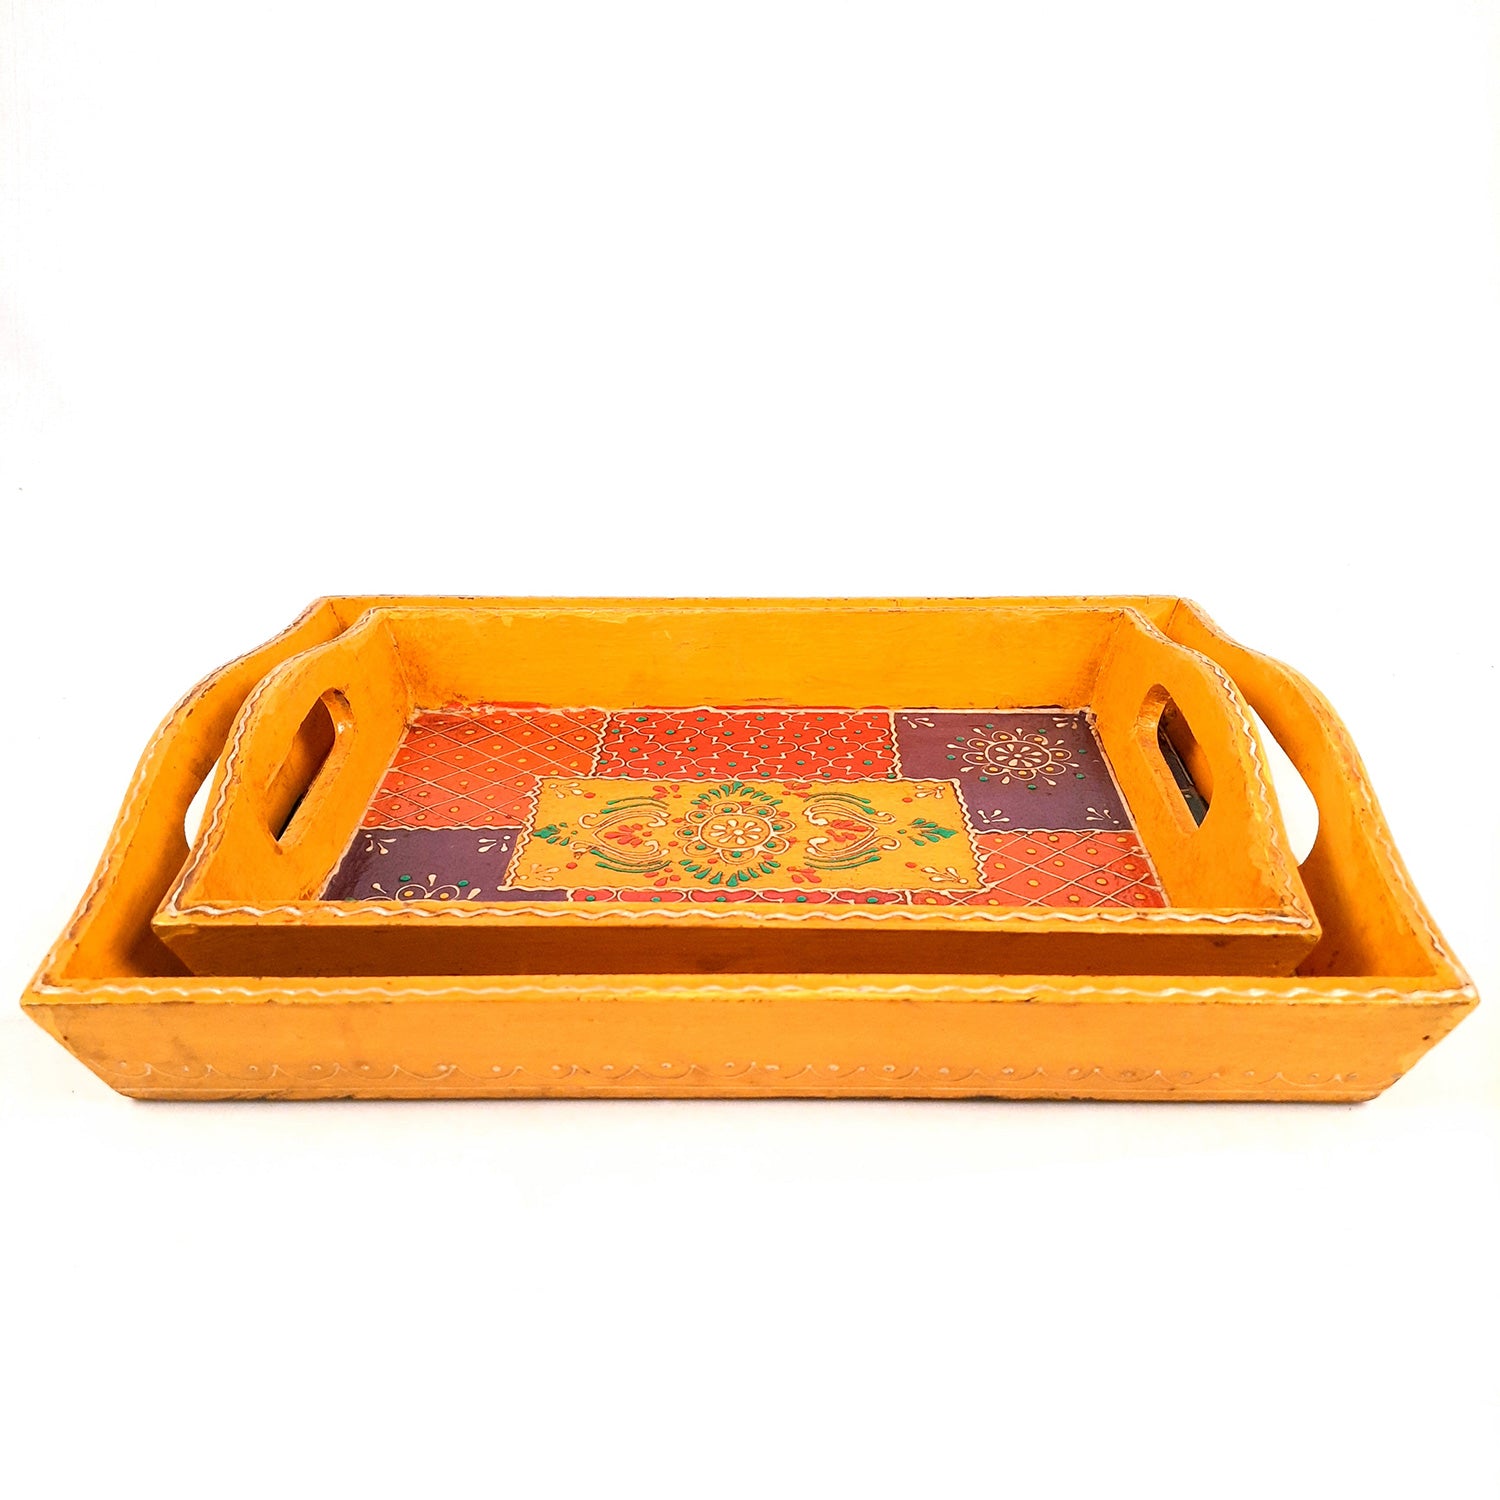 GiftsBouquet Decorative Tray/Gift Packing Tray/Wedding Tray/Saree Packing  Tray Wood Decorative Platter Price in India - Buy GiftsBouquet Decorative  Tray/Gift Packing Tray/Wedding Tray/Saree Packing Tray Wood Decorative  Platter online at Flipkart.com